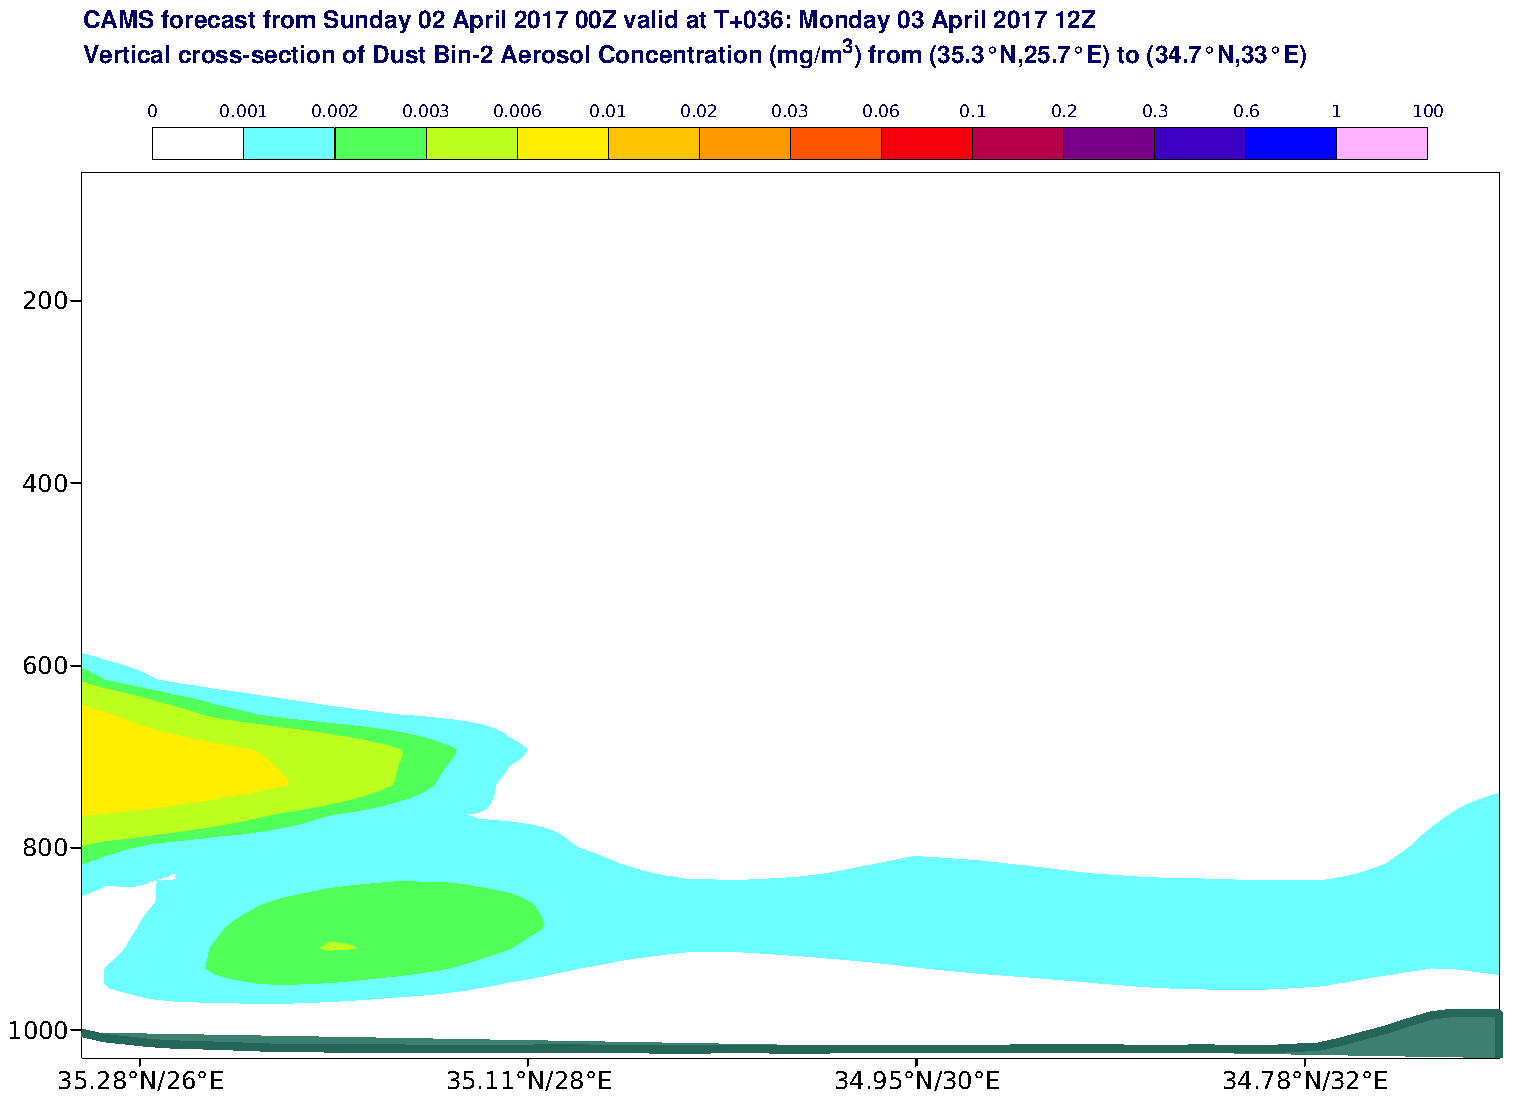 Vertical cross-section of Dust Bin-2 Aerosol Concentration (mg/m3) valid at T36 - 2017-04-03 12:00